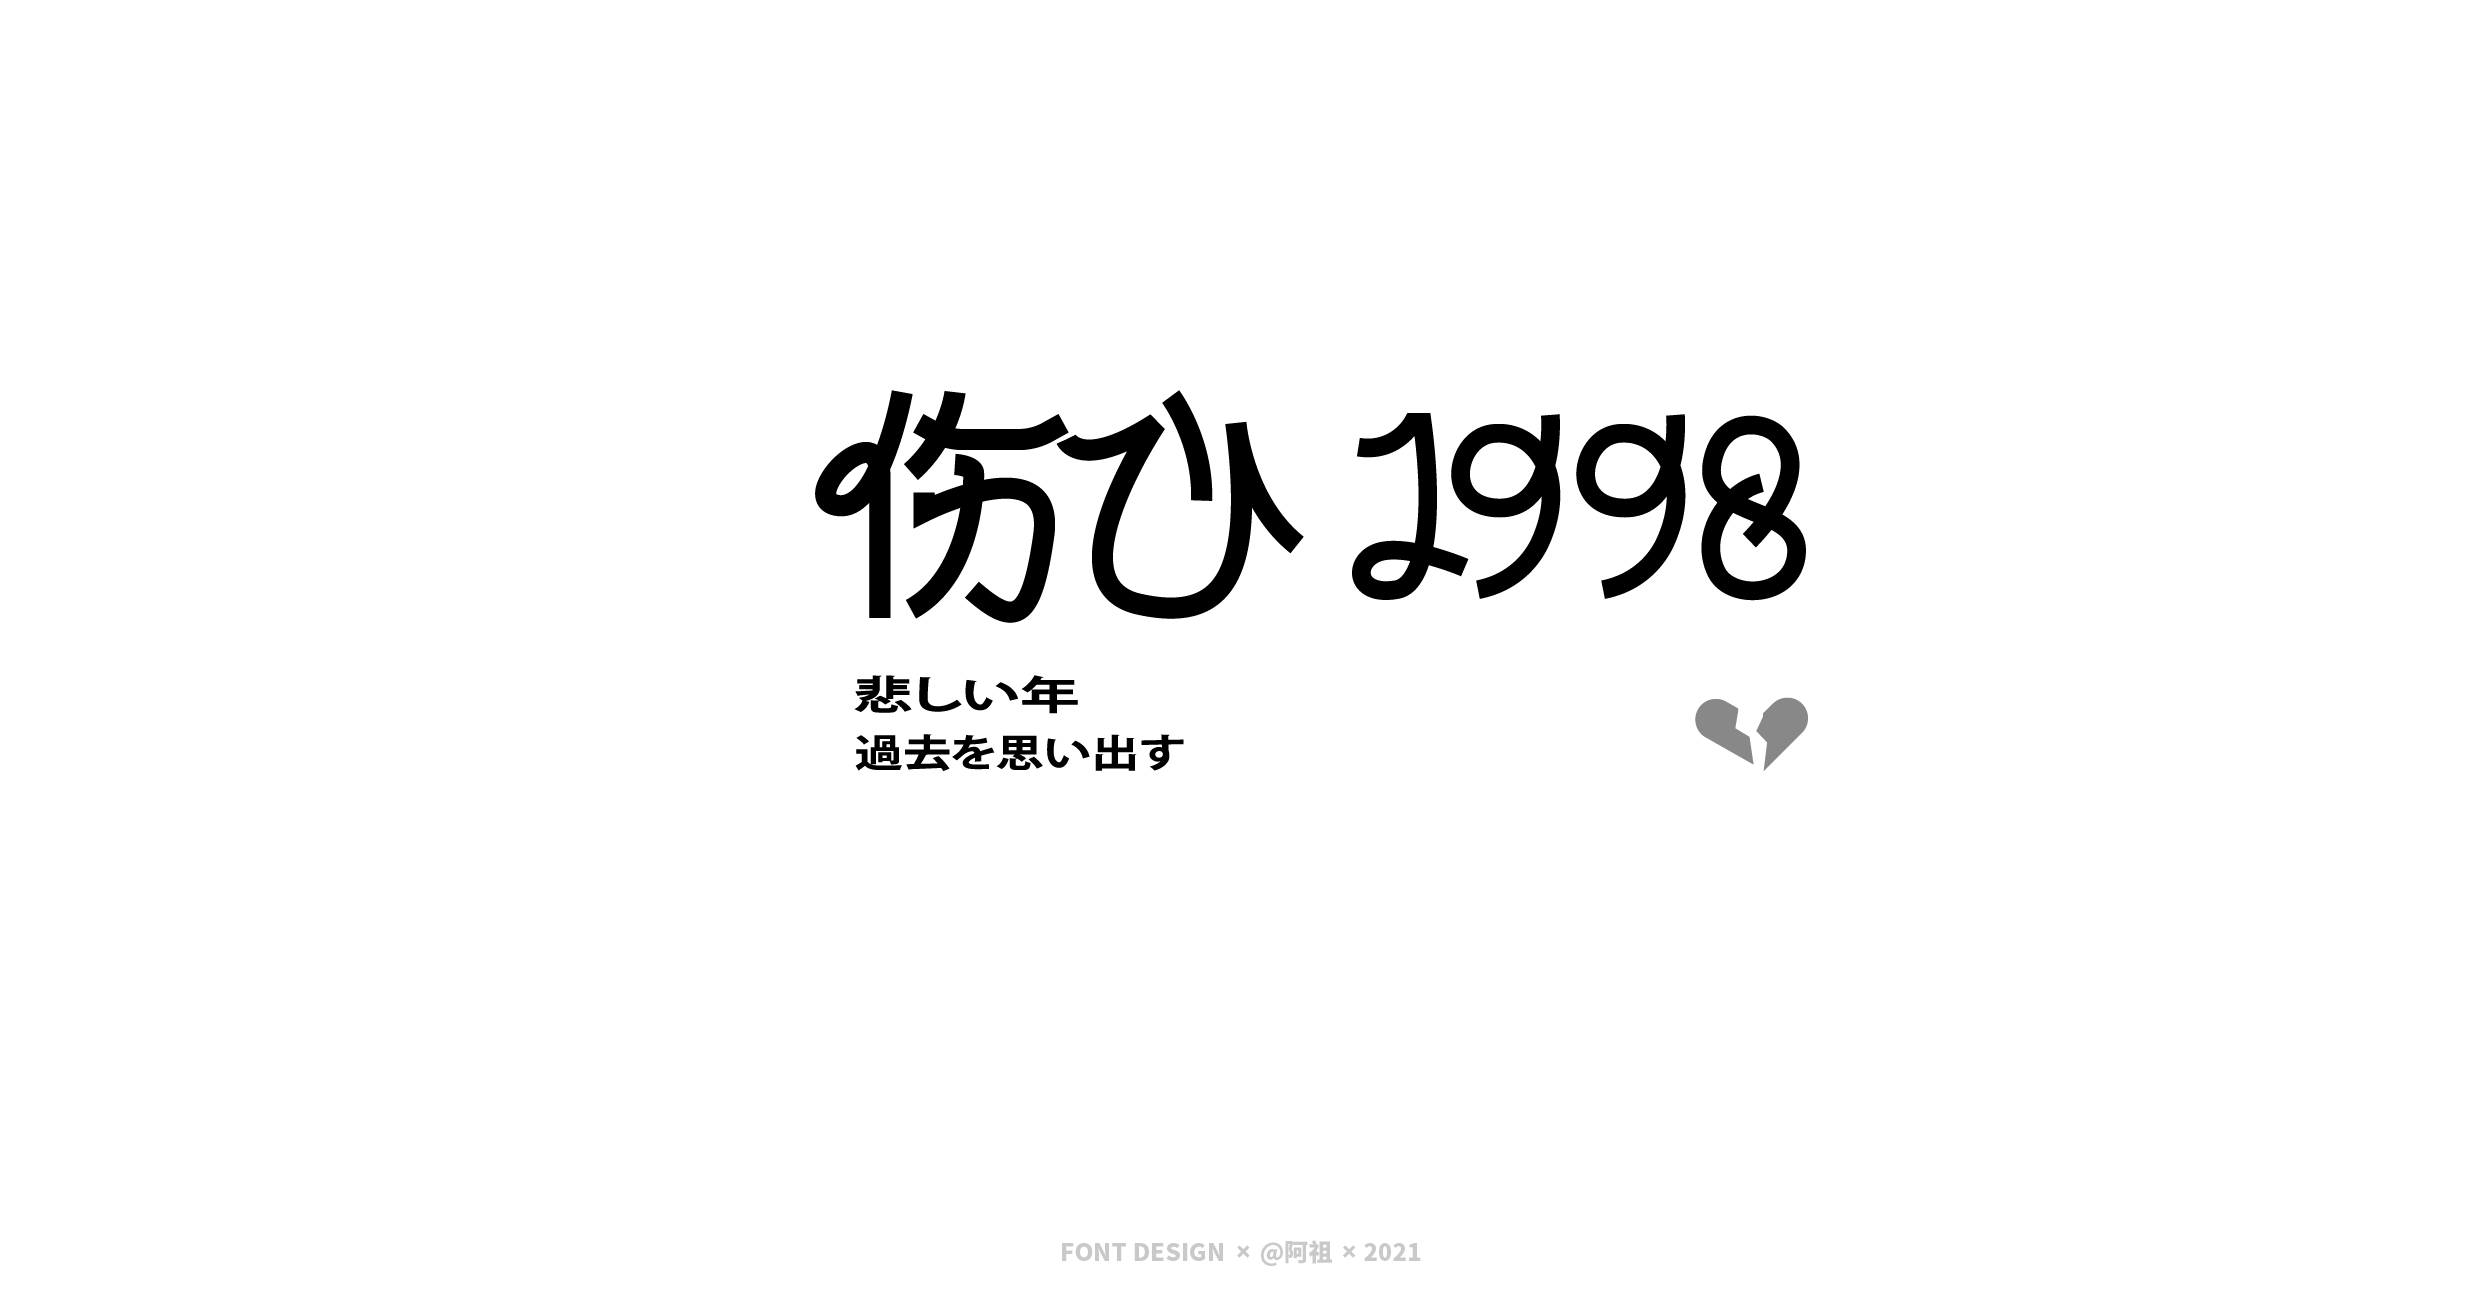 27P Collection of the latest Chinese font design schemes in 2021 #.48